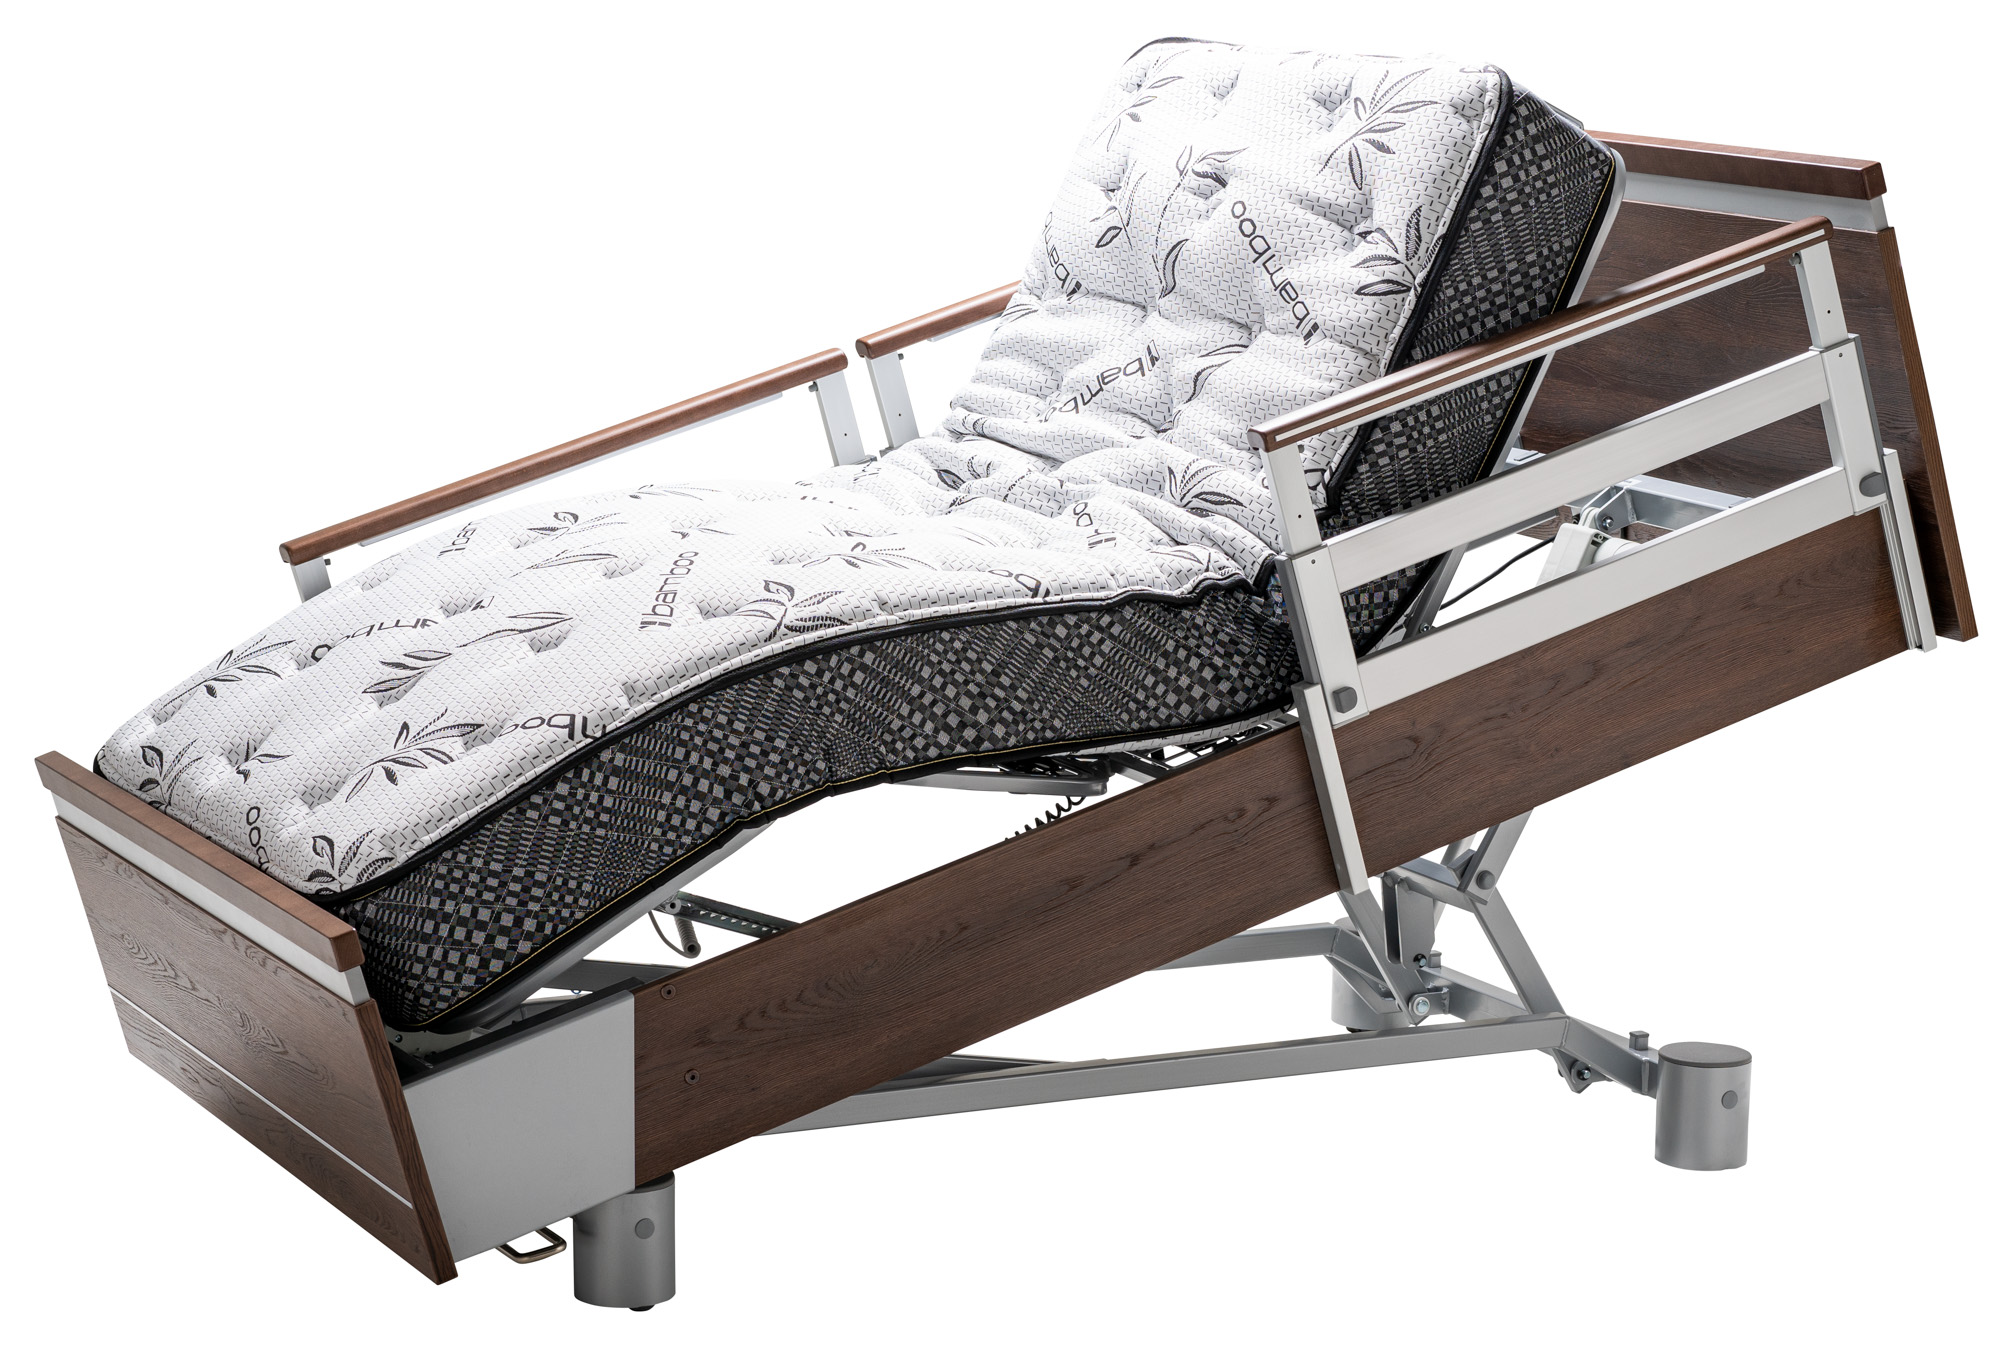 Sondercare Electric Home Hospital Bed